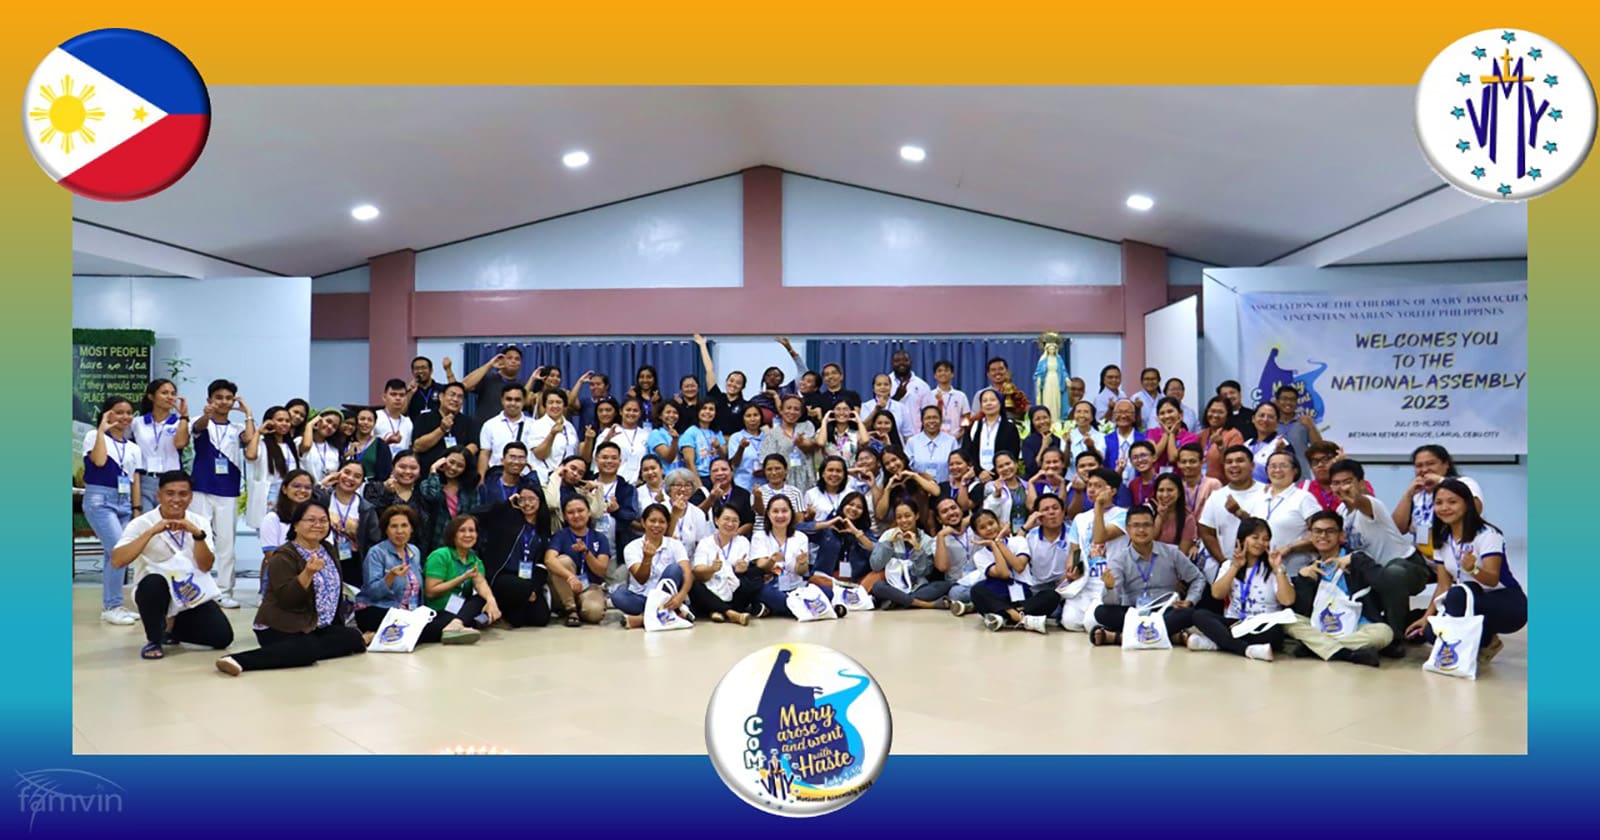 National Assembly 2023 of Vincentian Marian Youth in the Philippines